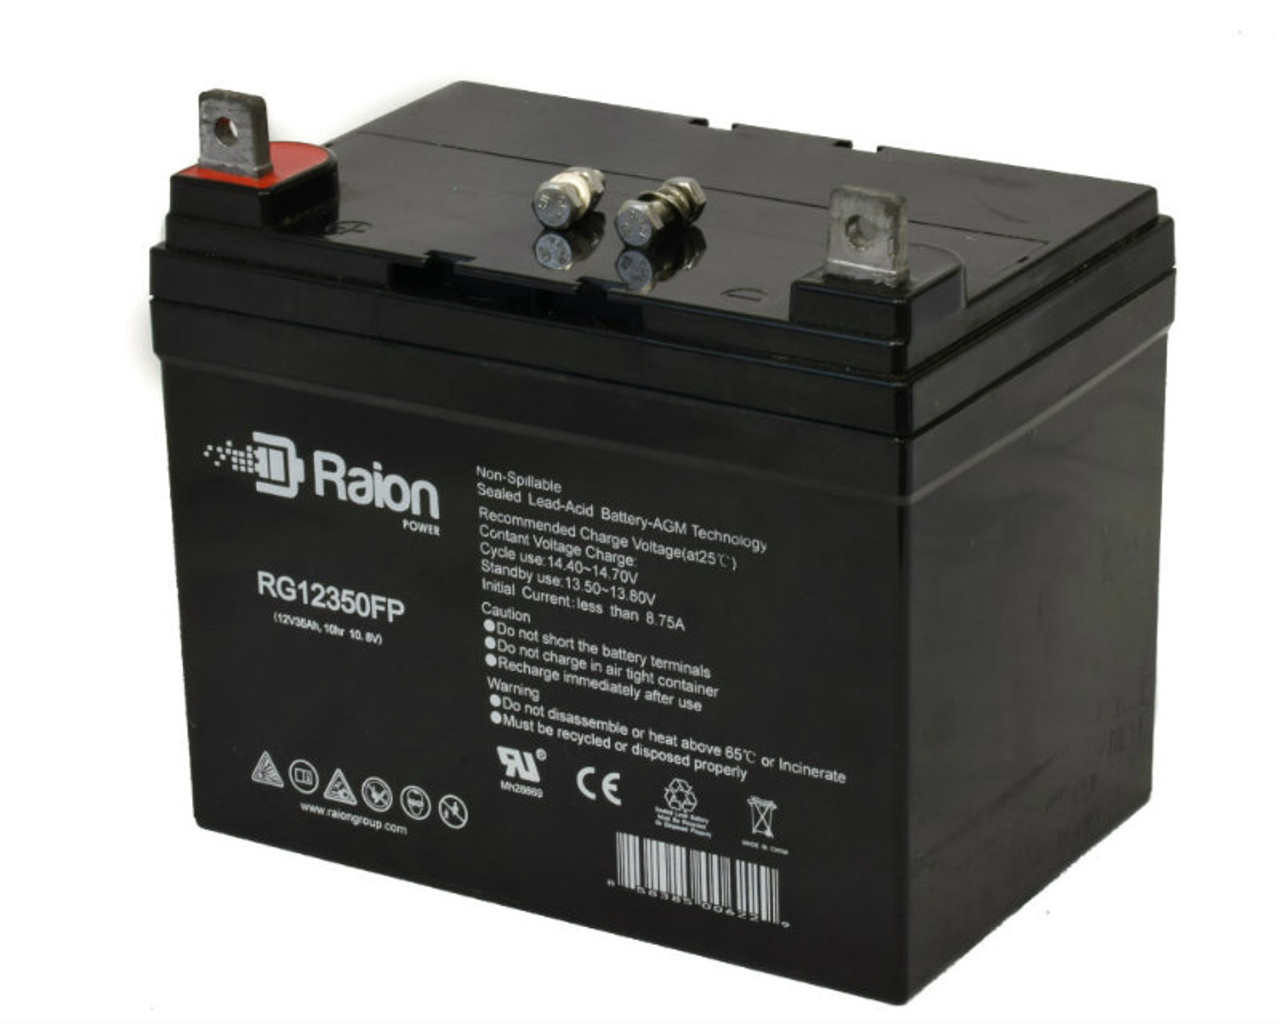 Raion Power Replacement 12V 35Ah RG12350FP Mobility Scooter Battery for Golden Technology Compass GP601 CC